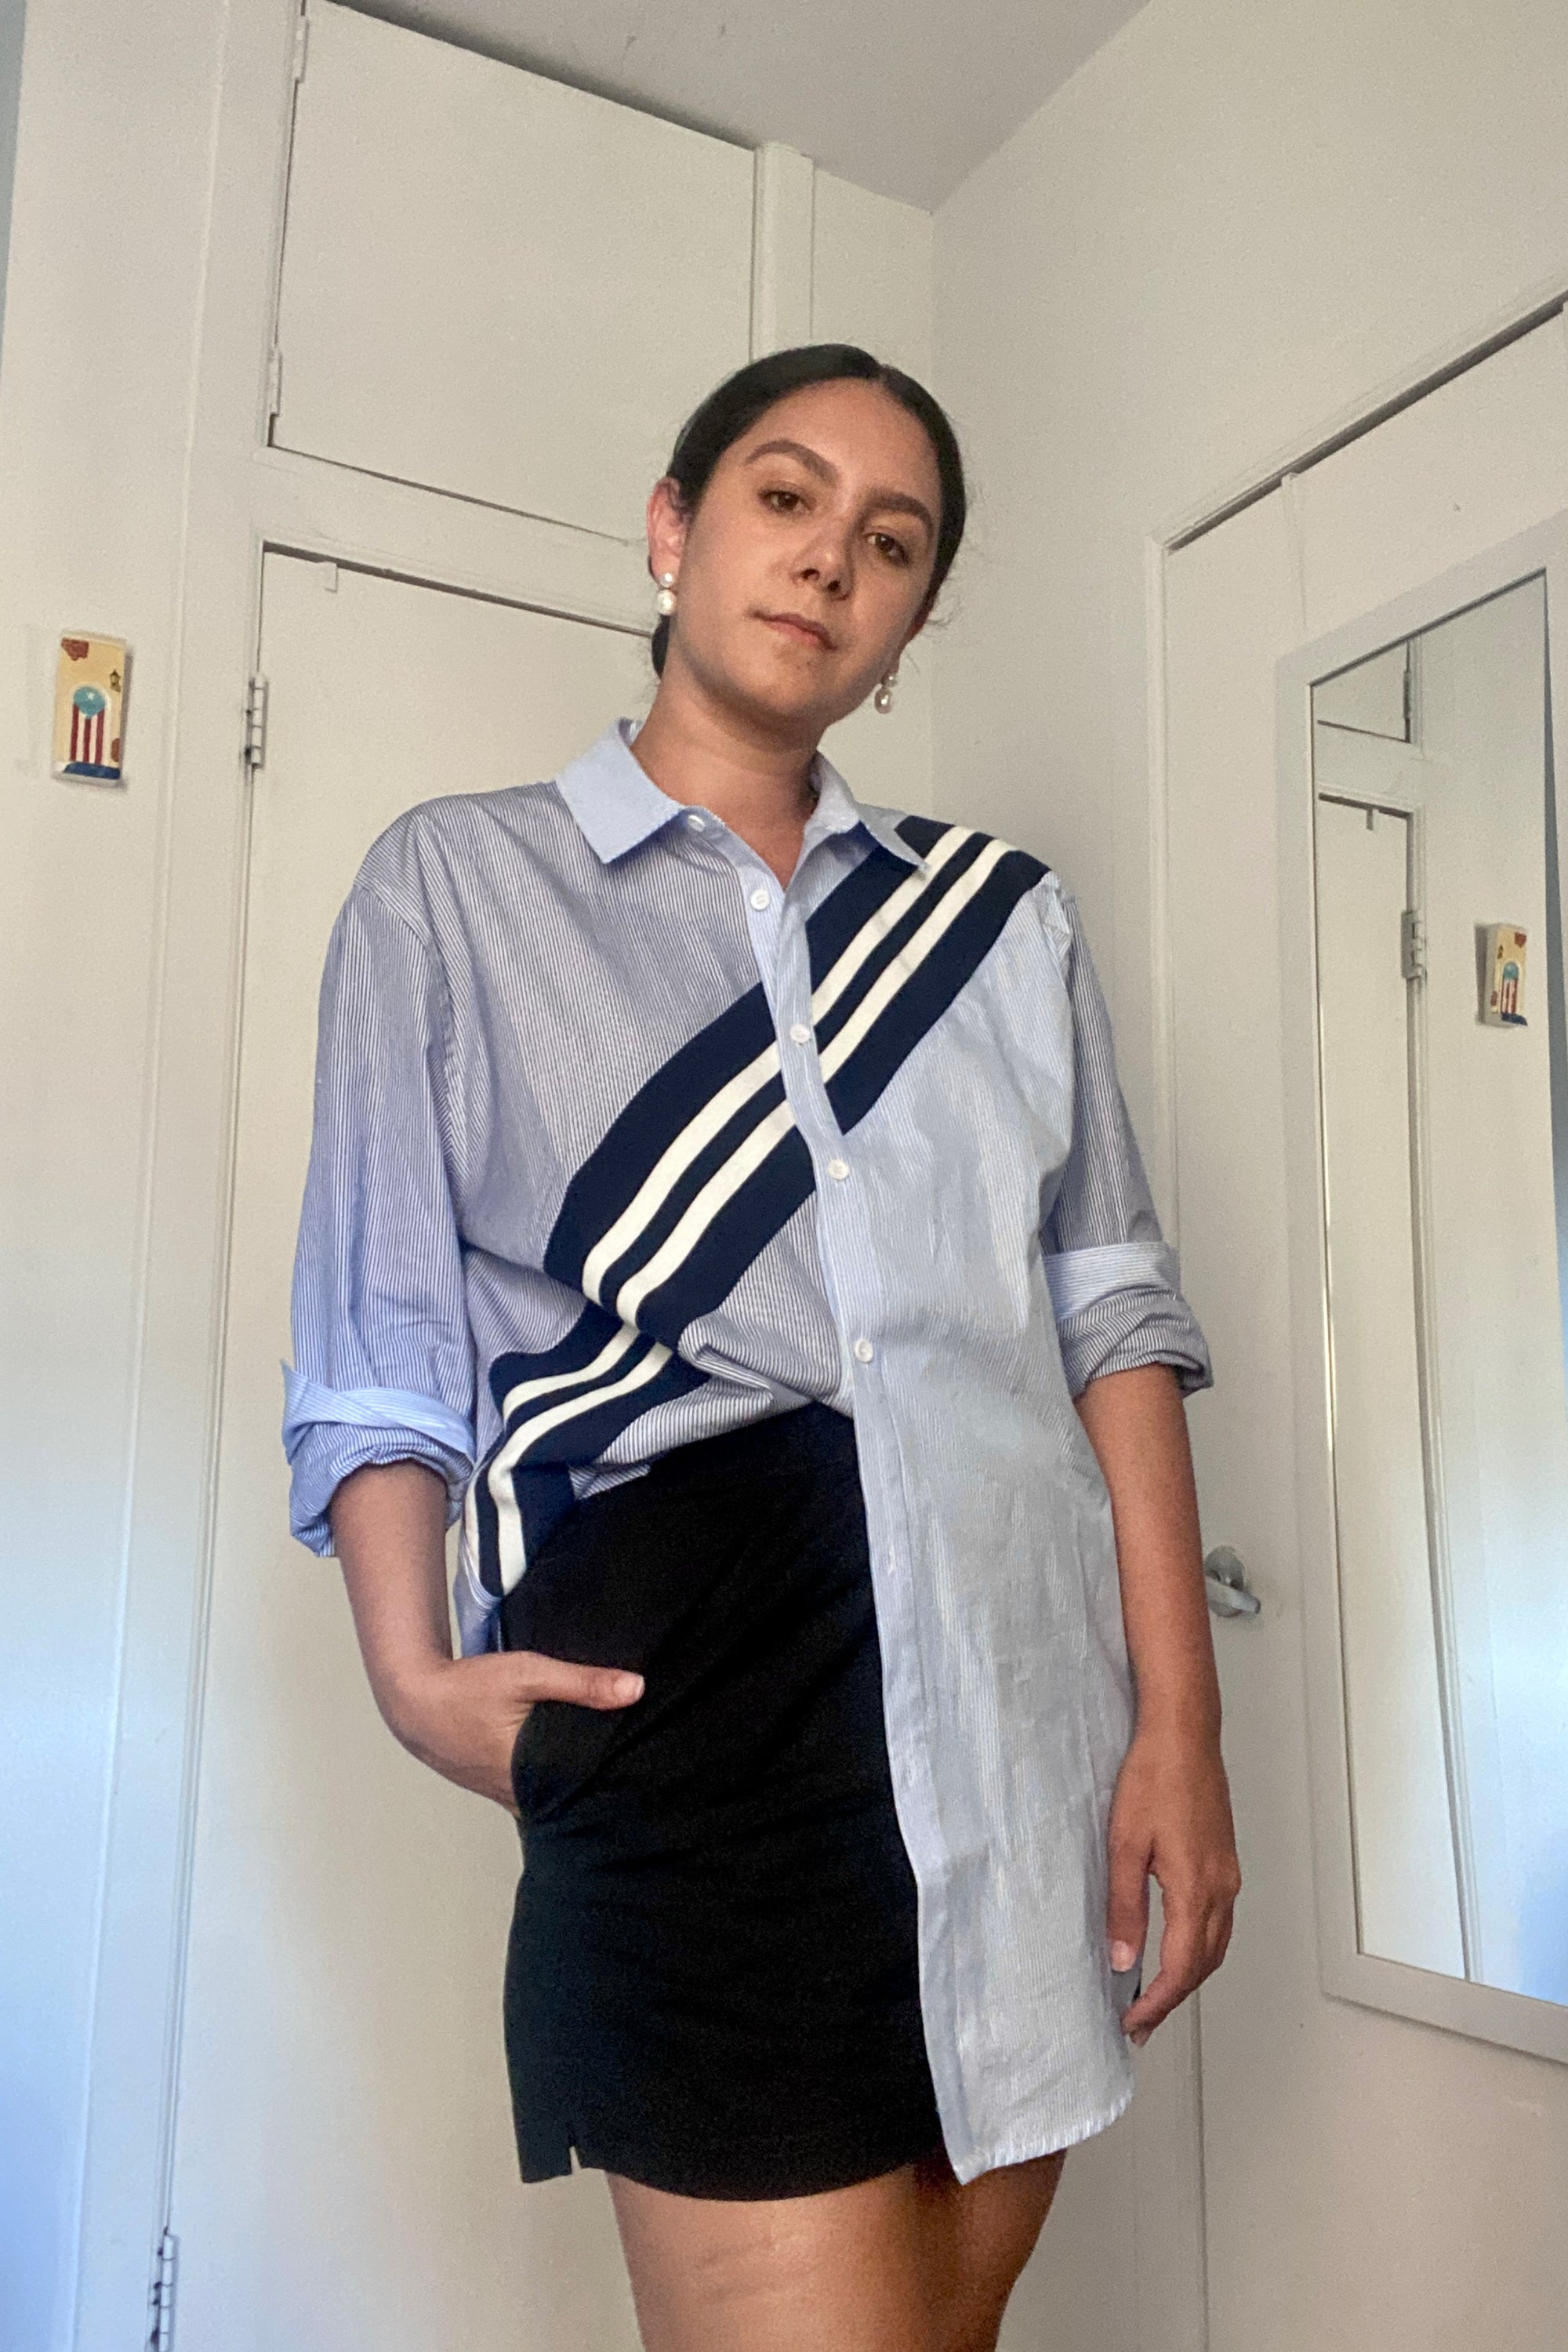 Solid & Striped Launched Fall 2022 RTW: How To Style It